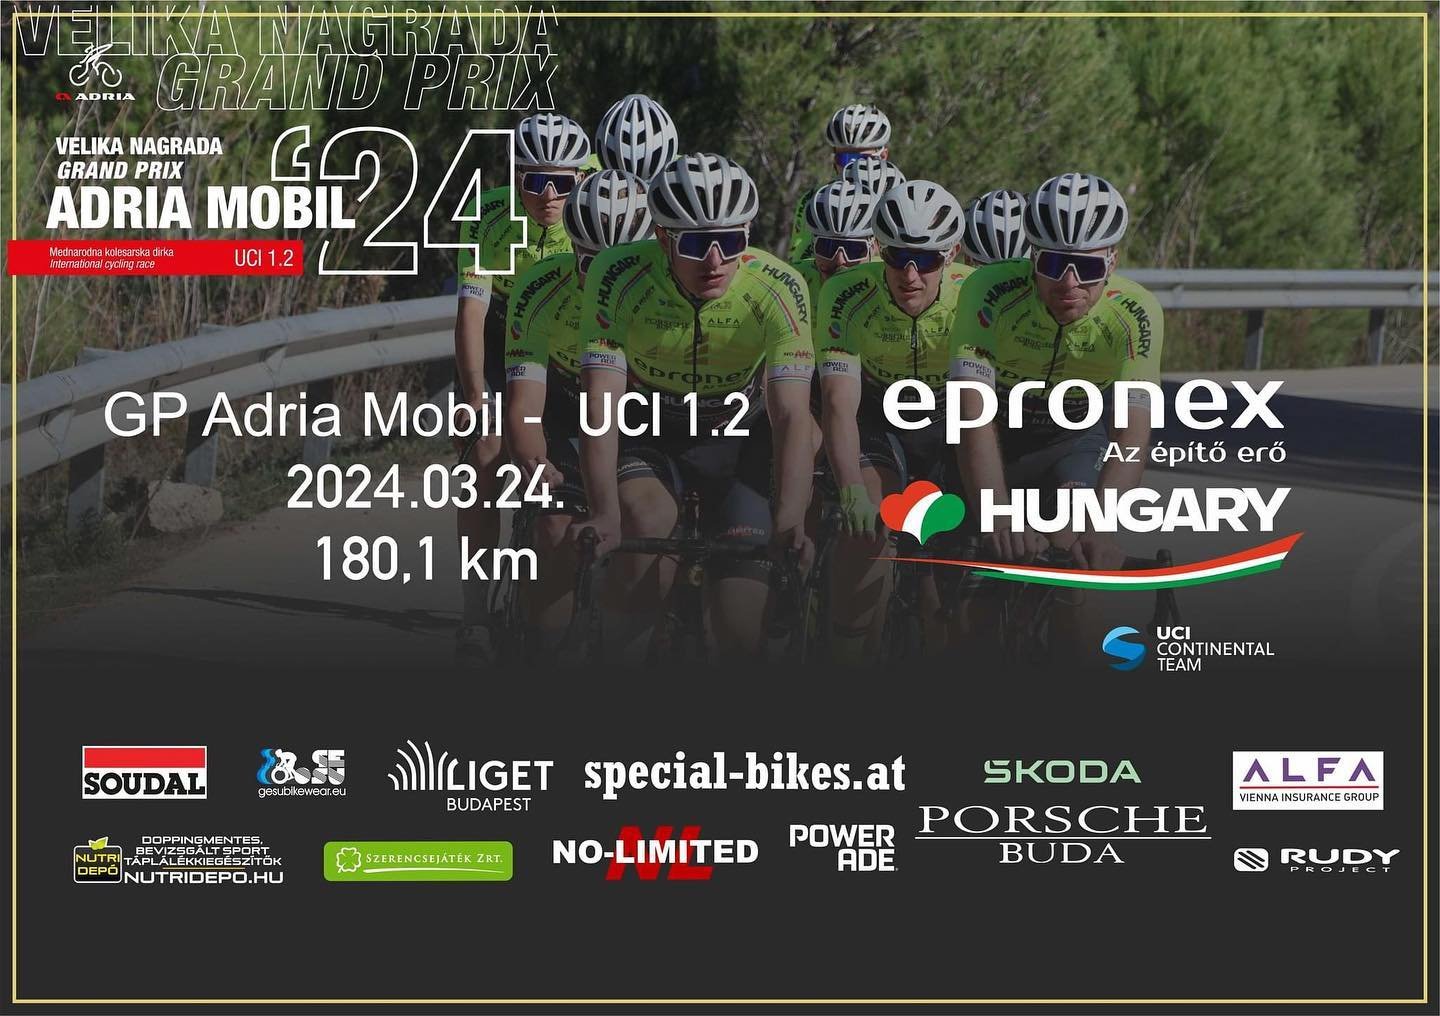 Our next race will be GP Adria UCI 1.2; start is at 12:30.
There will be also a live streaming: https://www.adria-mobil-cycling.com/sl

Our riders will be: &Aacute;d&aacute;m Karl, Bal&aacute;zs R&oacute;zsa, Zsolt Istlstekker, Gergő Orosz, Byron Mun